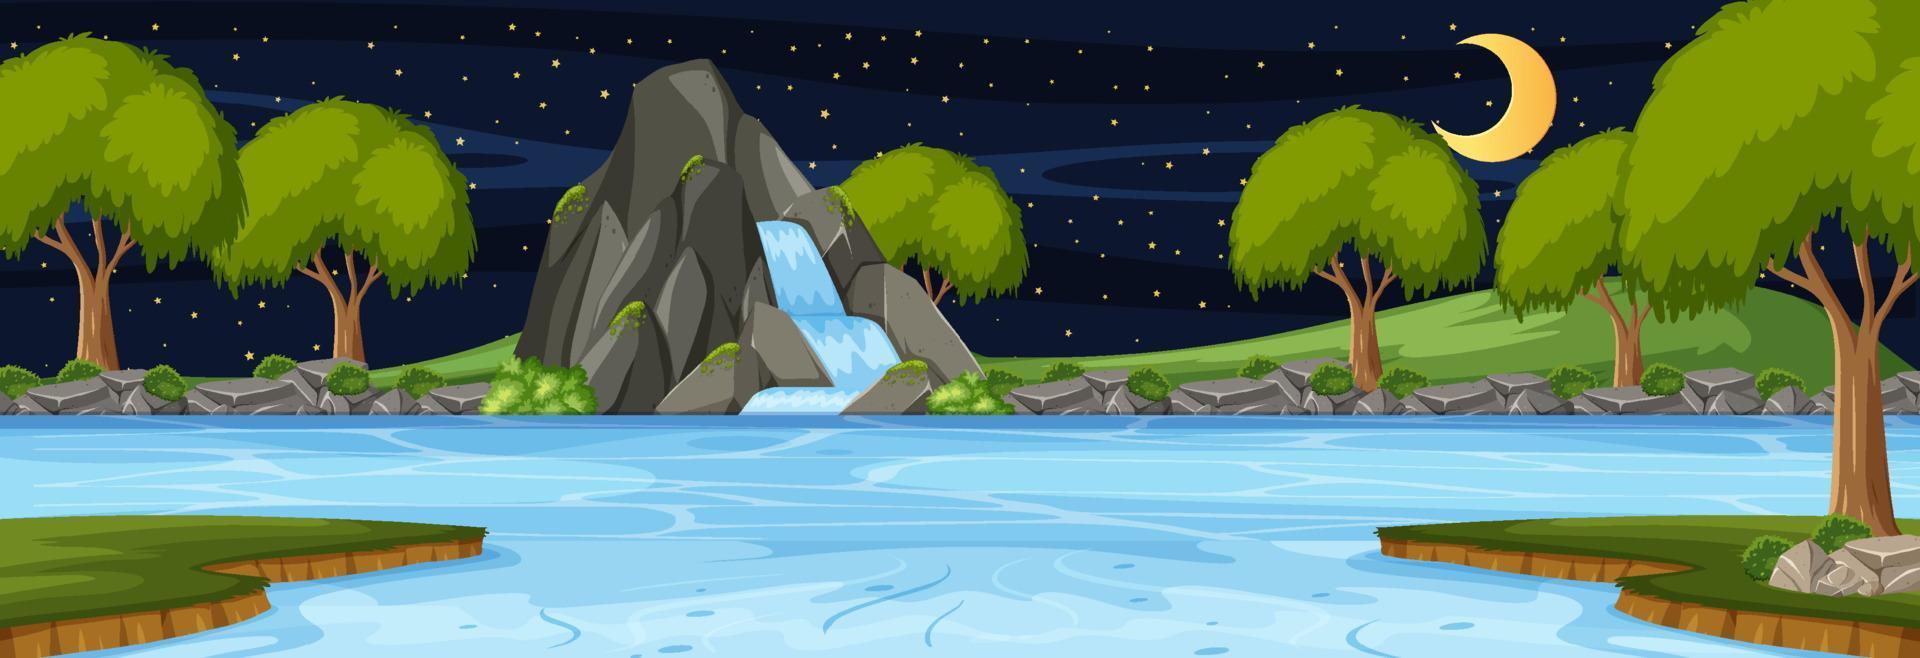 Forest horizontal scene at night with waterfall vector